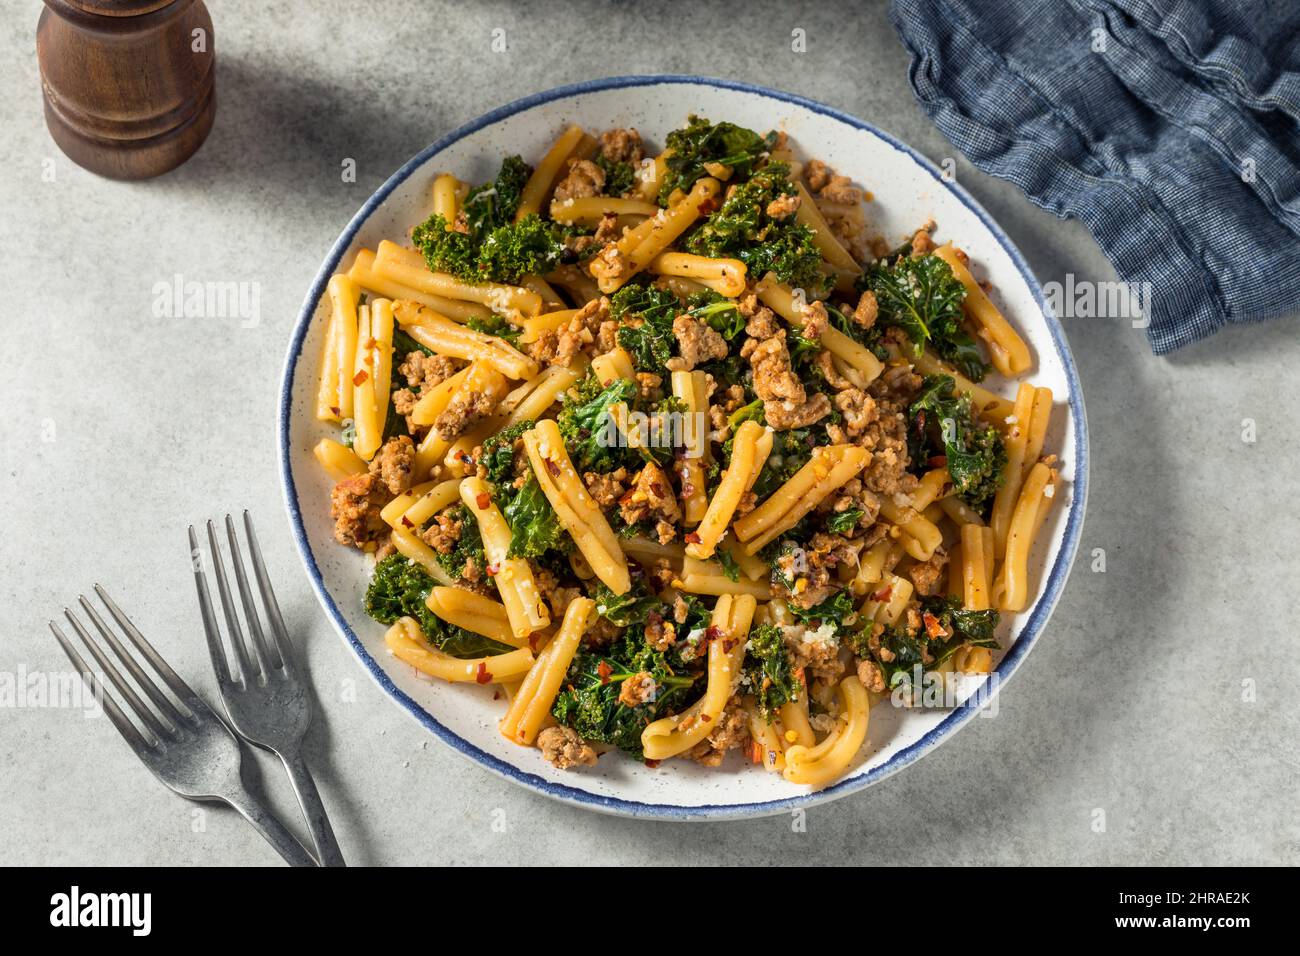 Homemade Kale and Sausage Caserecci Pasta with Cheese Stock Photo